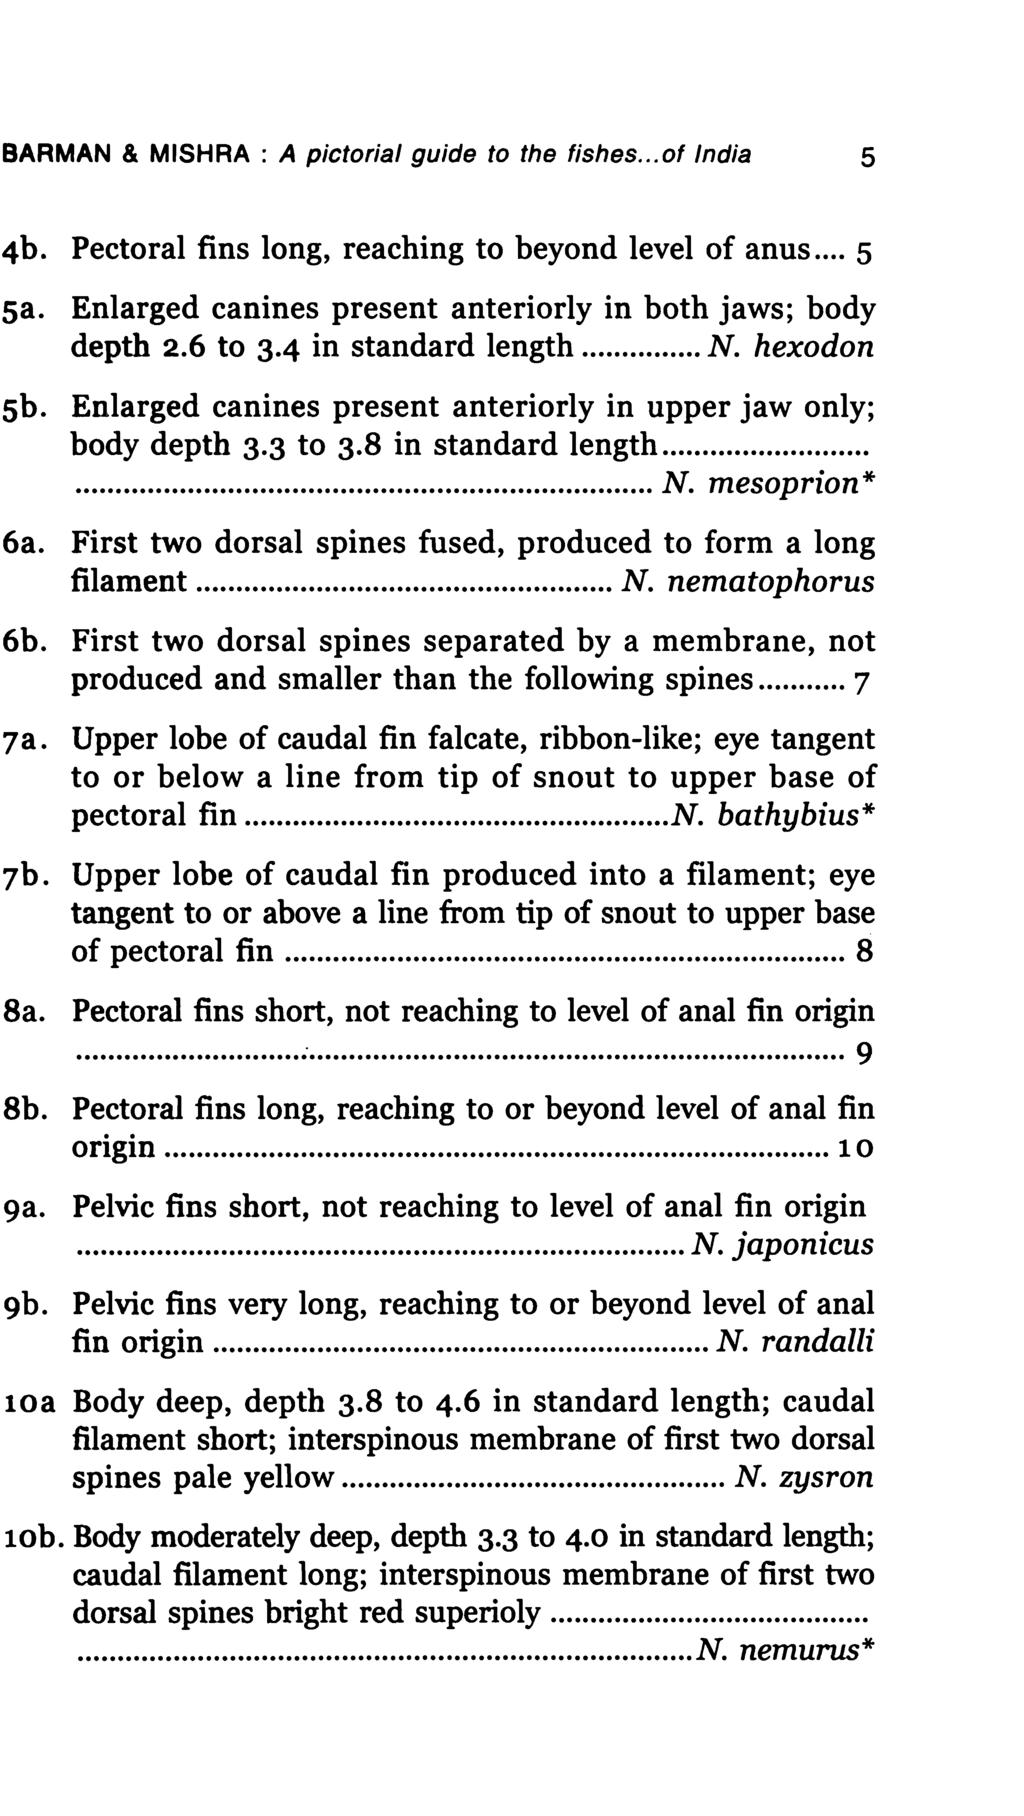 BARMAN & MISHRA : A pictorial guide to the fishes... of India 5 4b. Pectoral fins long, reaching to beyond level of anus... 5 sa. Enlarged canines present anteriorly in both jaws; body depth 2.6 to 3.